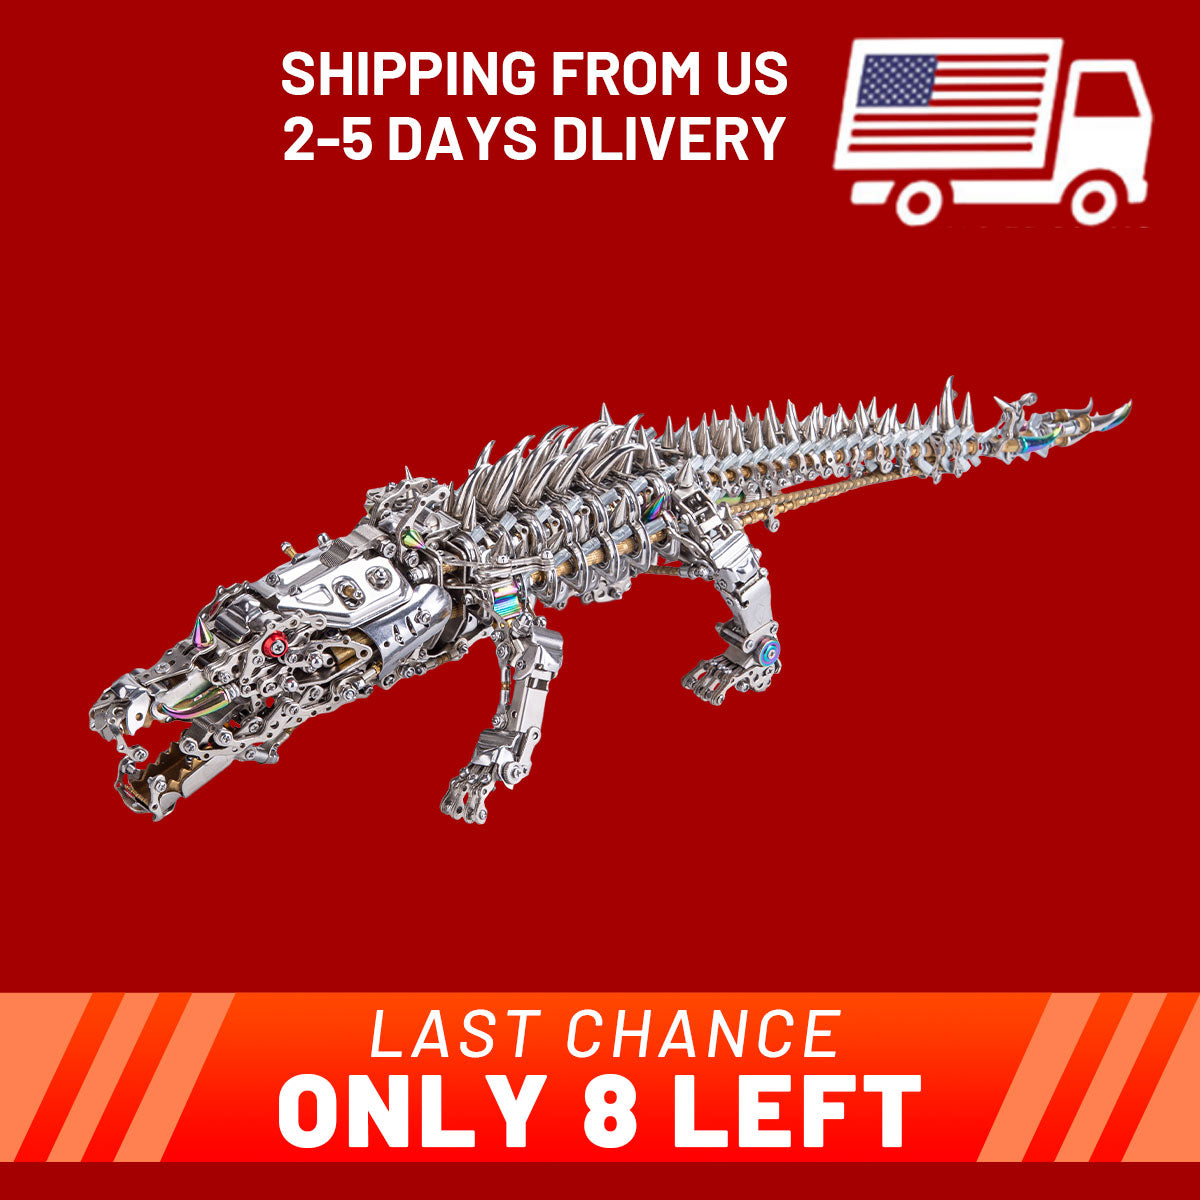 crocodile-3d-metal-puzzle-shipping from-usa-directly-christmas-stirlingkit-official-website (4).jpg__PID:f7112e16-b136-4e66-89bd-401e8c64d4aa